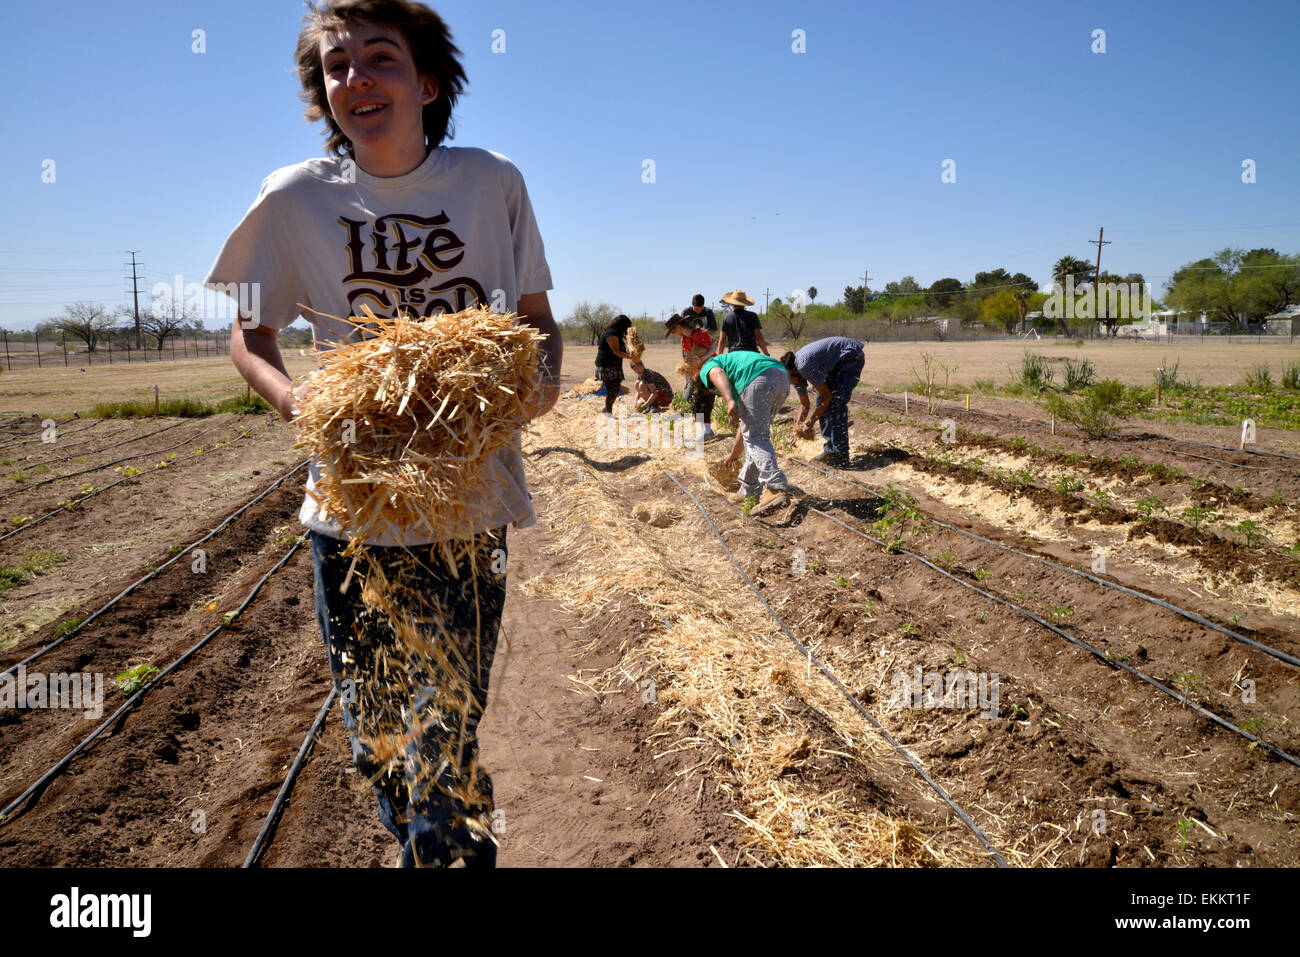 Student and adult volunteers work to produce food for needy families on a Chávez Day of Service, Tucson, Arizona, USA. Stock Photo